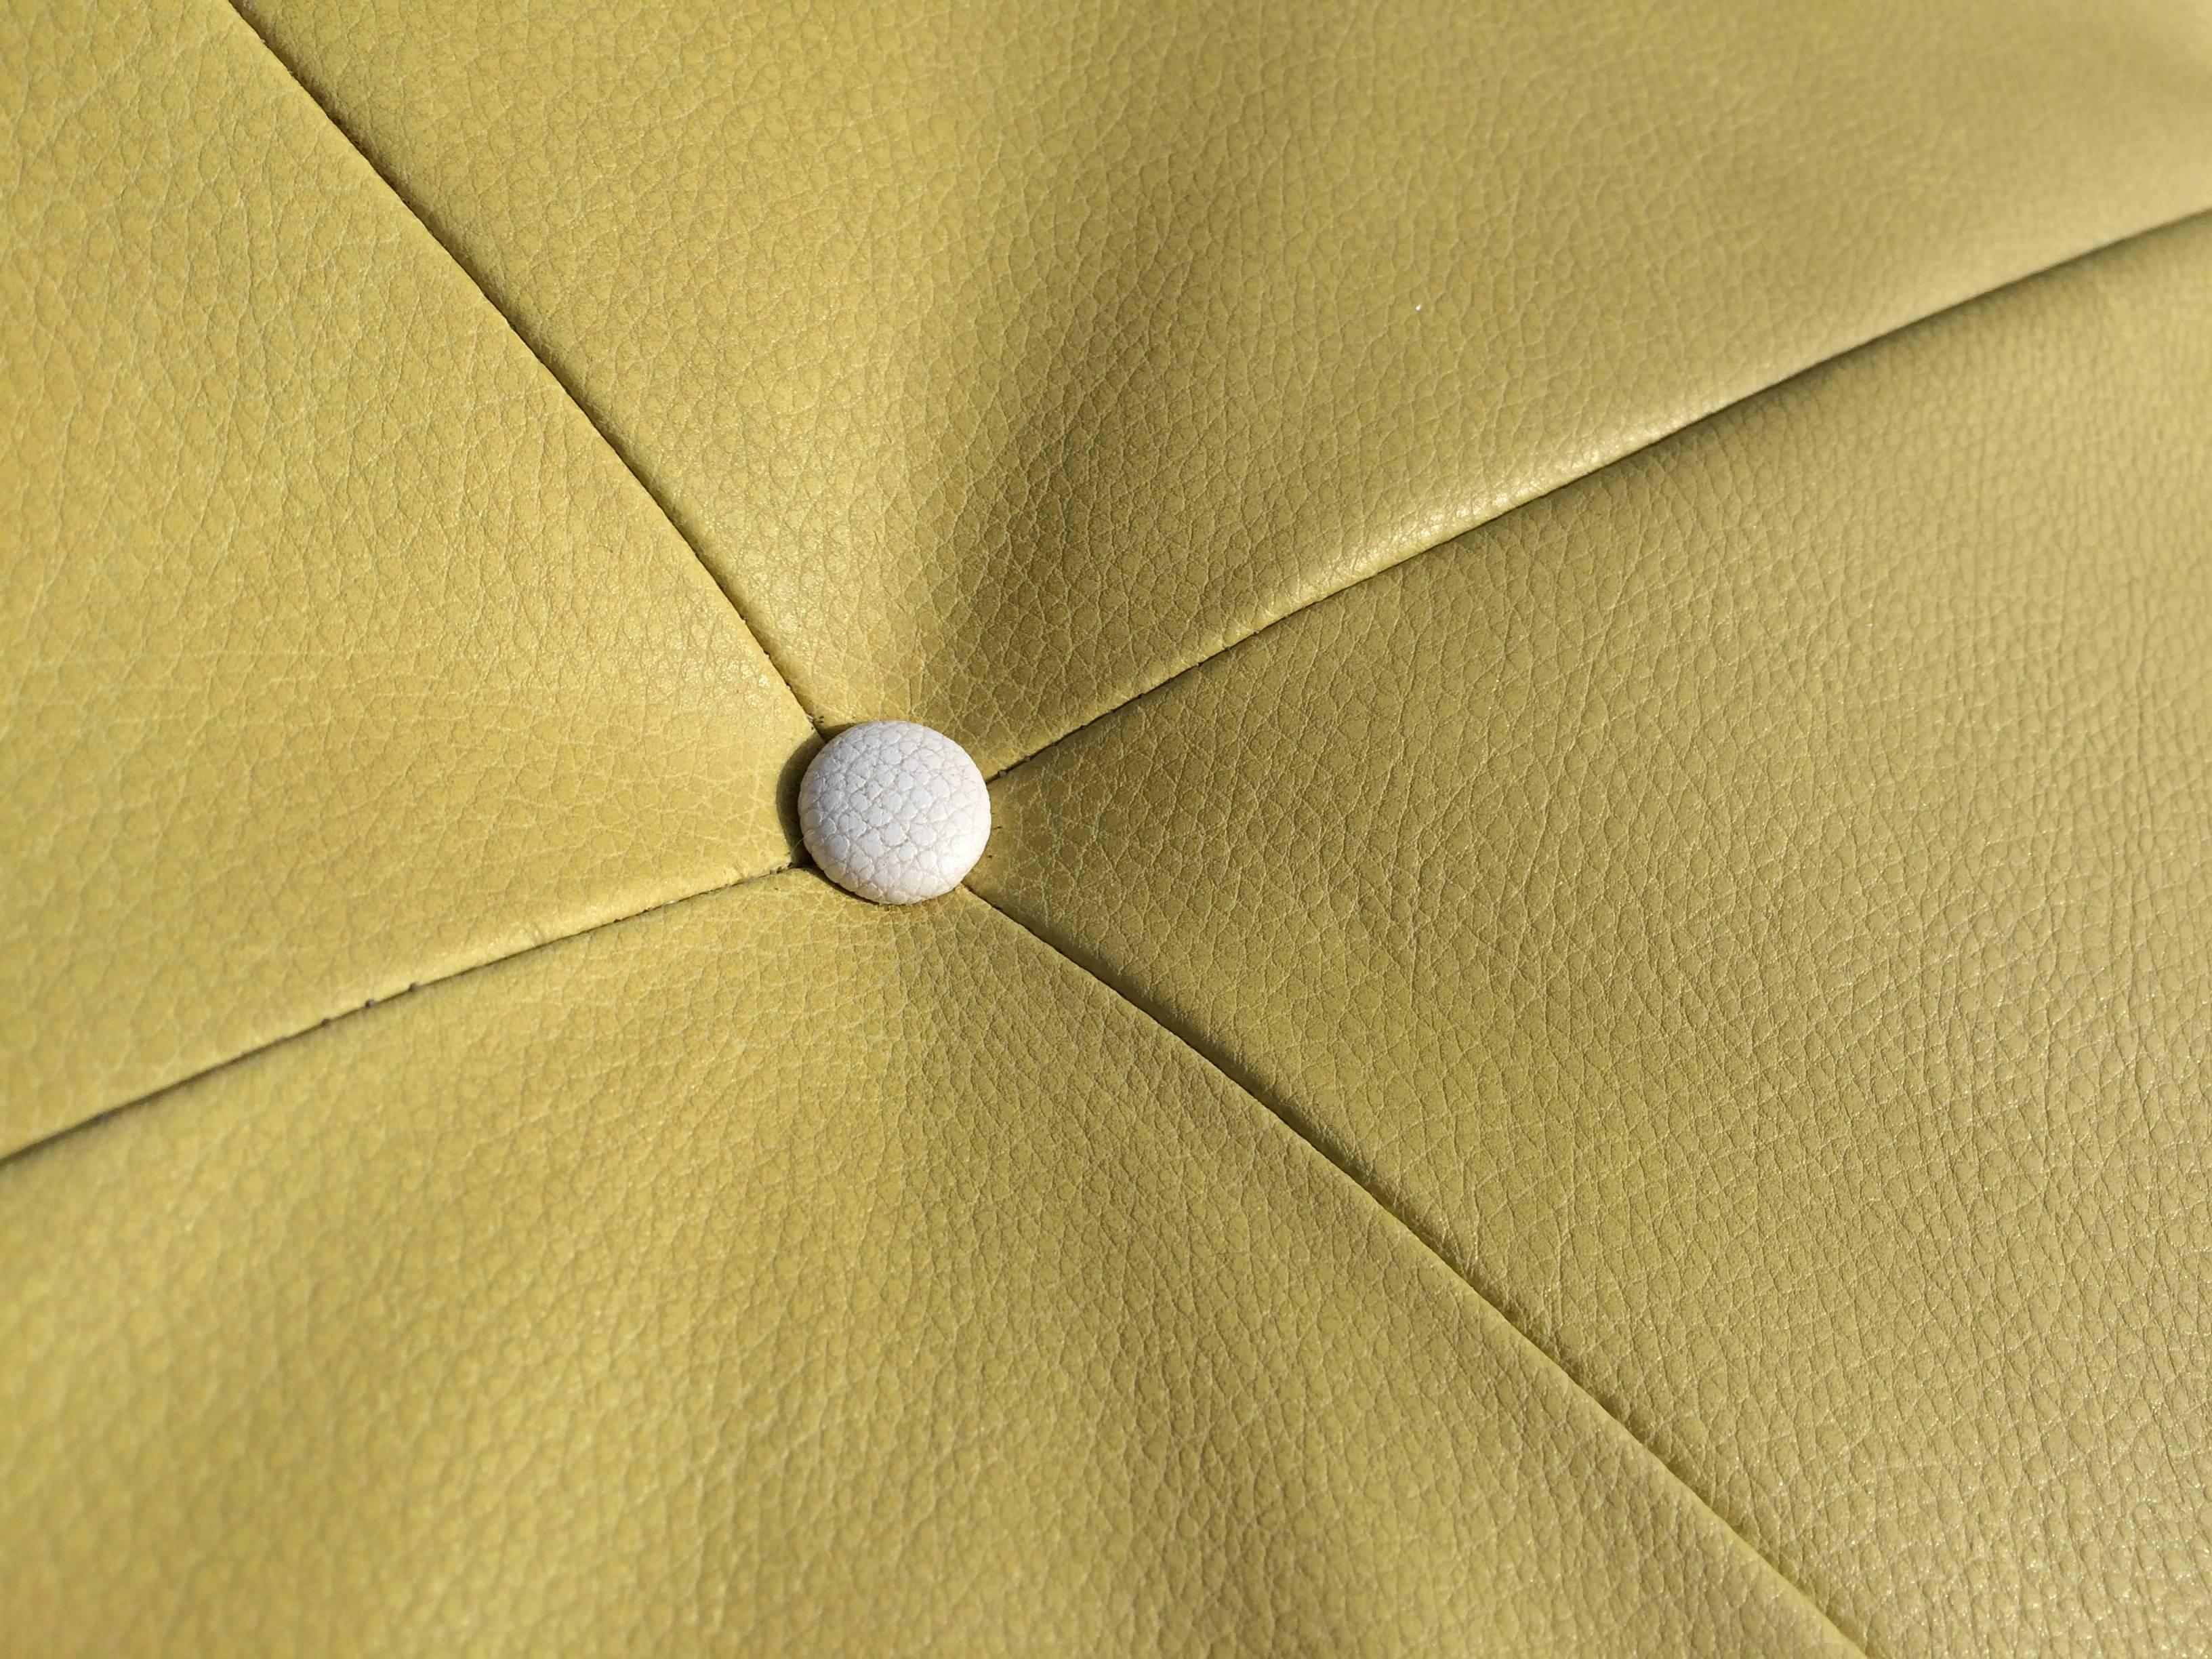 Late 20th Century Tufted Round Yellow Ottoman on Brass Castors